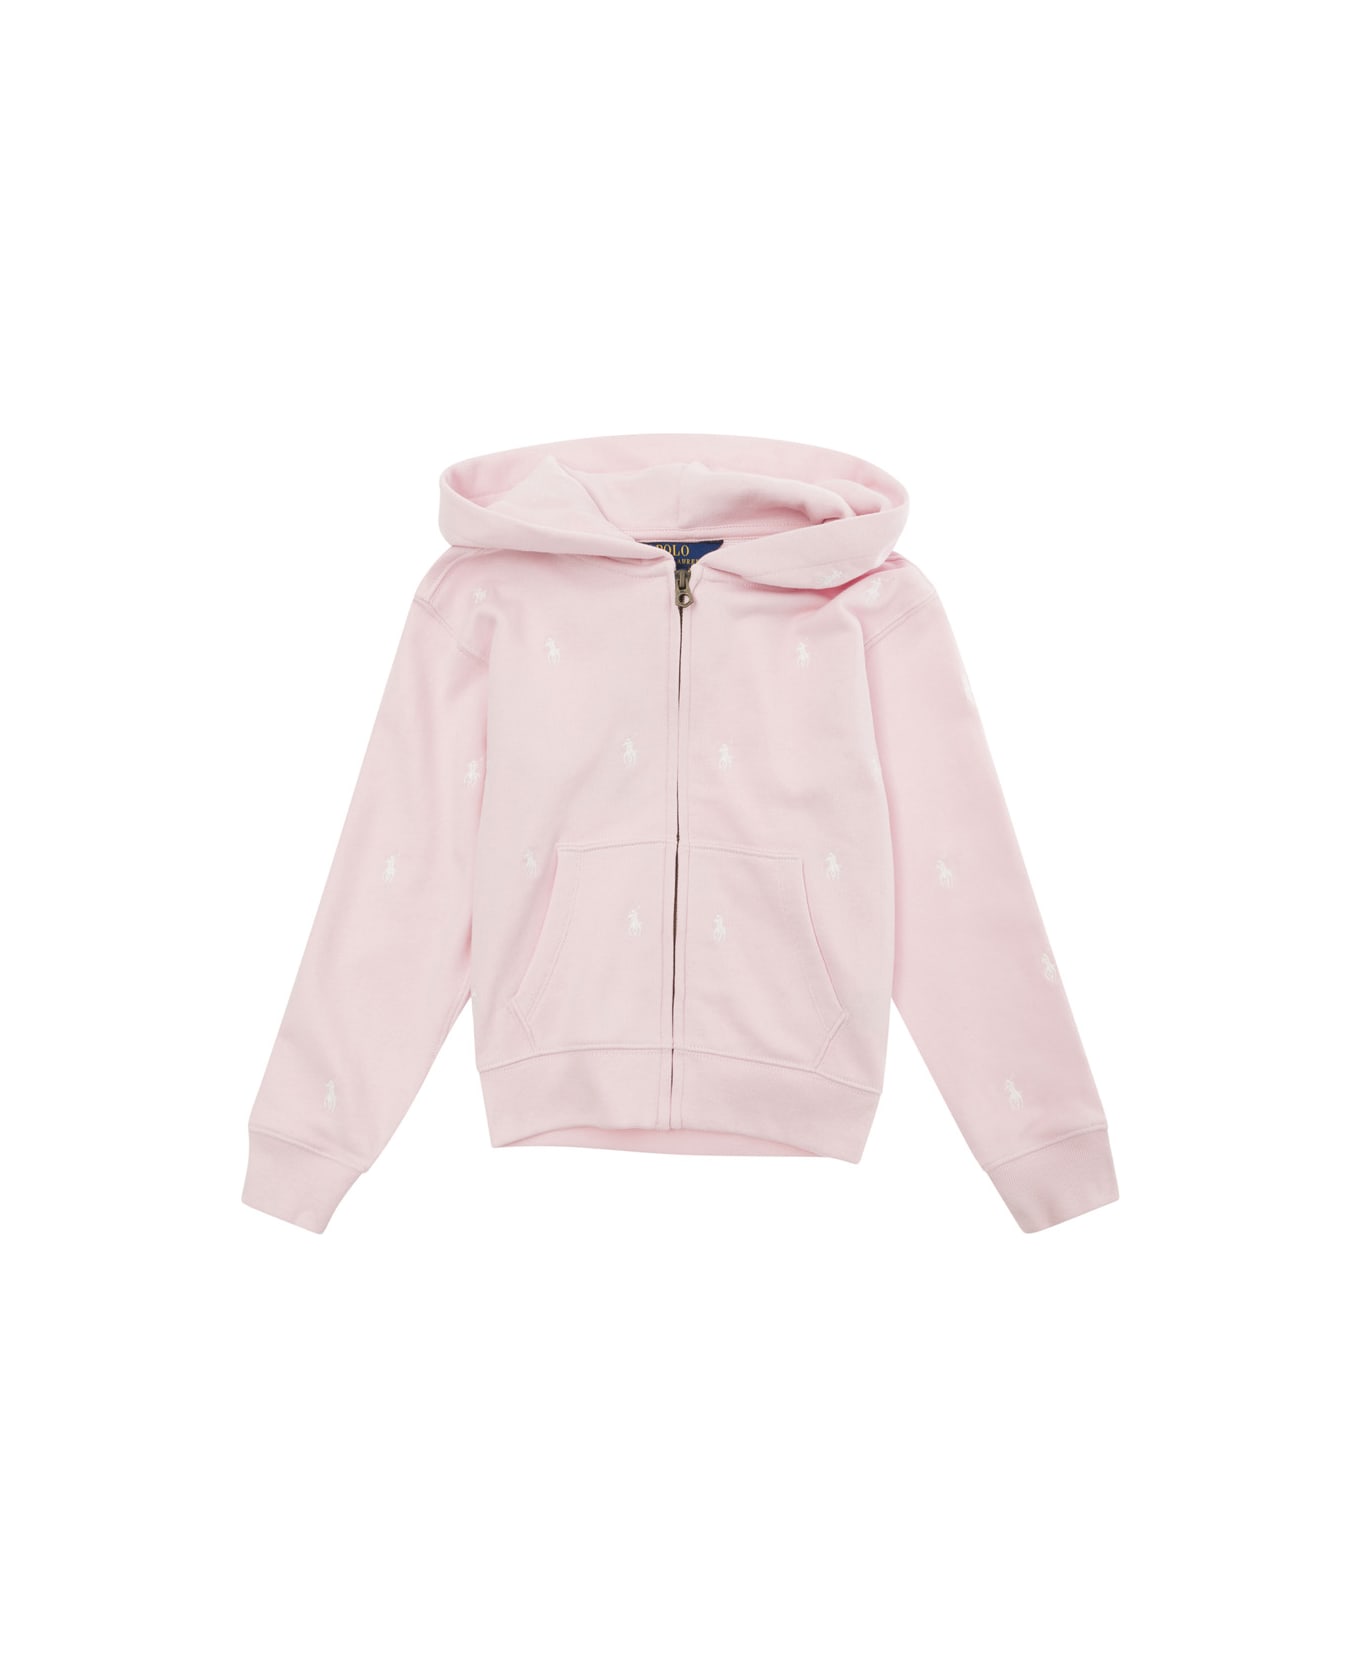 Polo Ralph Lauren Pink Hoodie With Embroidered Pony In Cotton Blend Girl - Pink